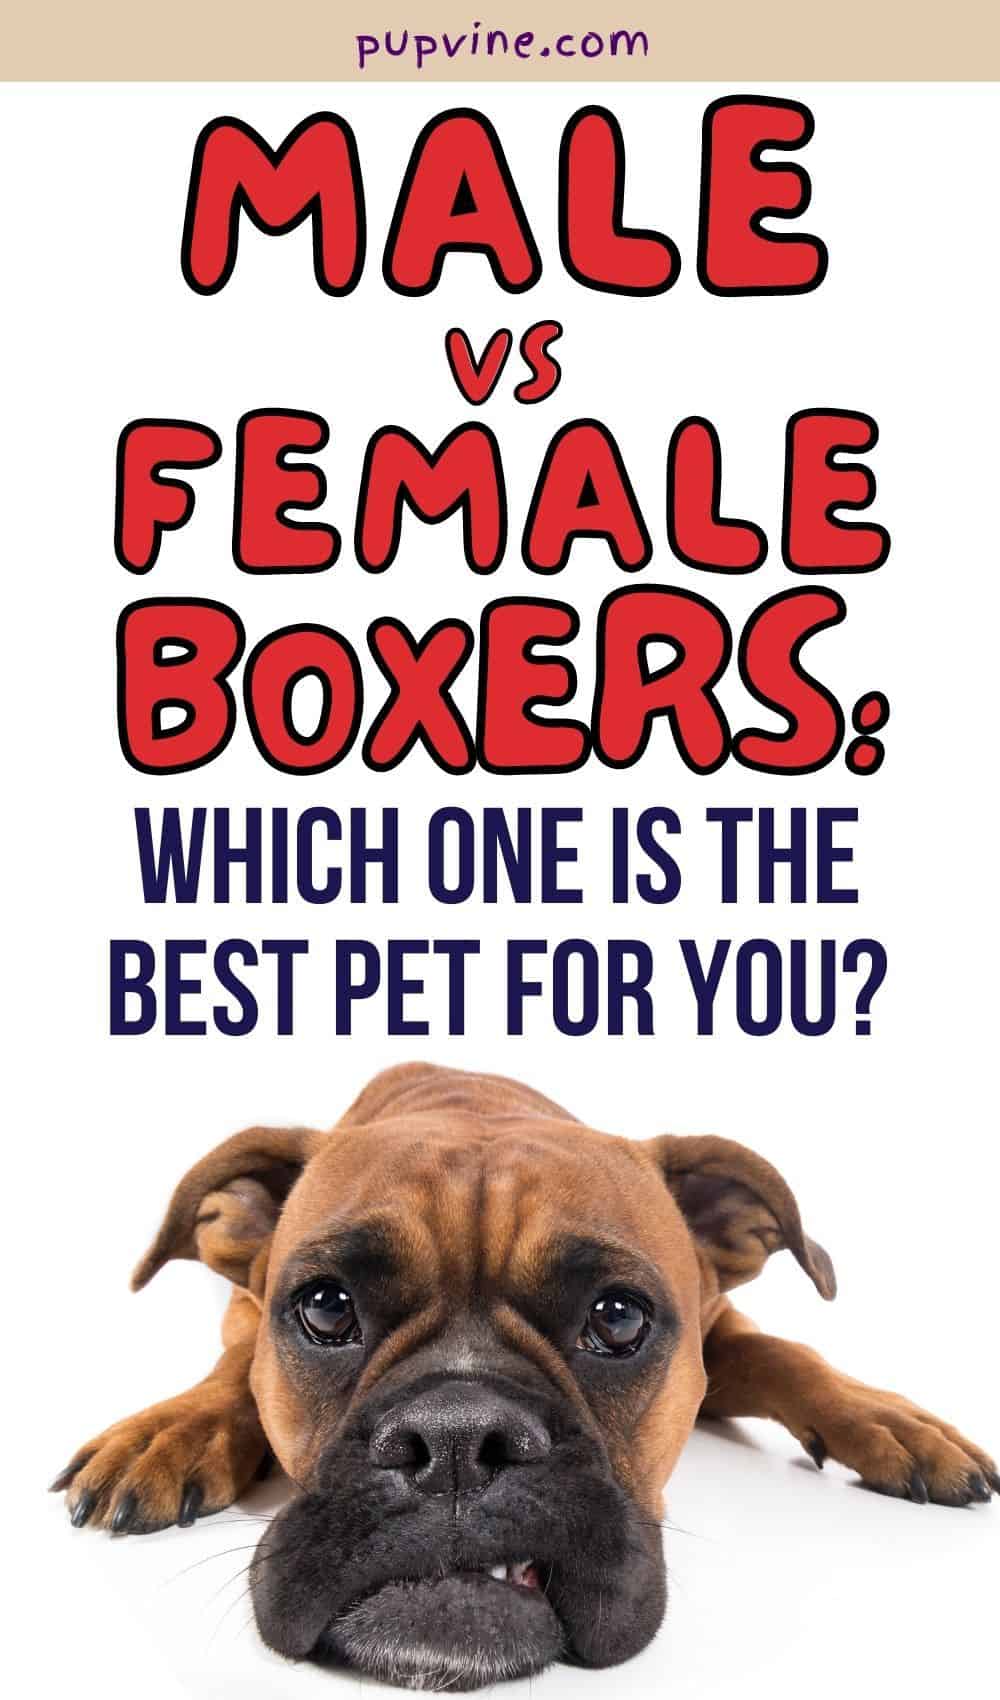 Male Vs Female Boxers: Which One Is The Best Pet For You?